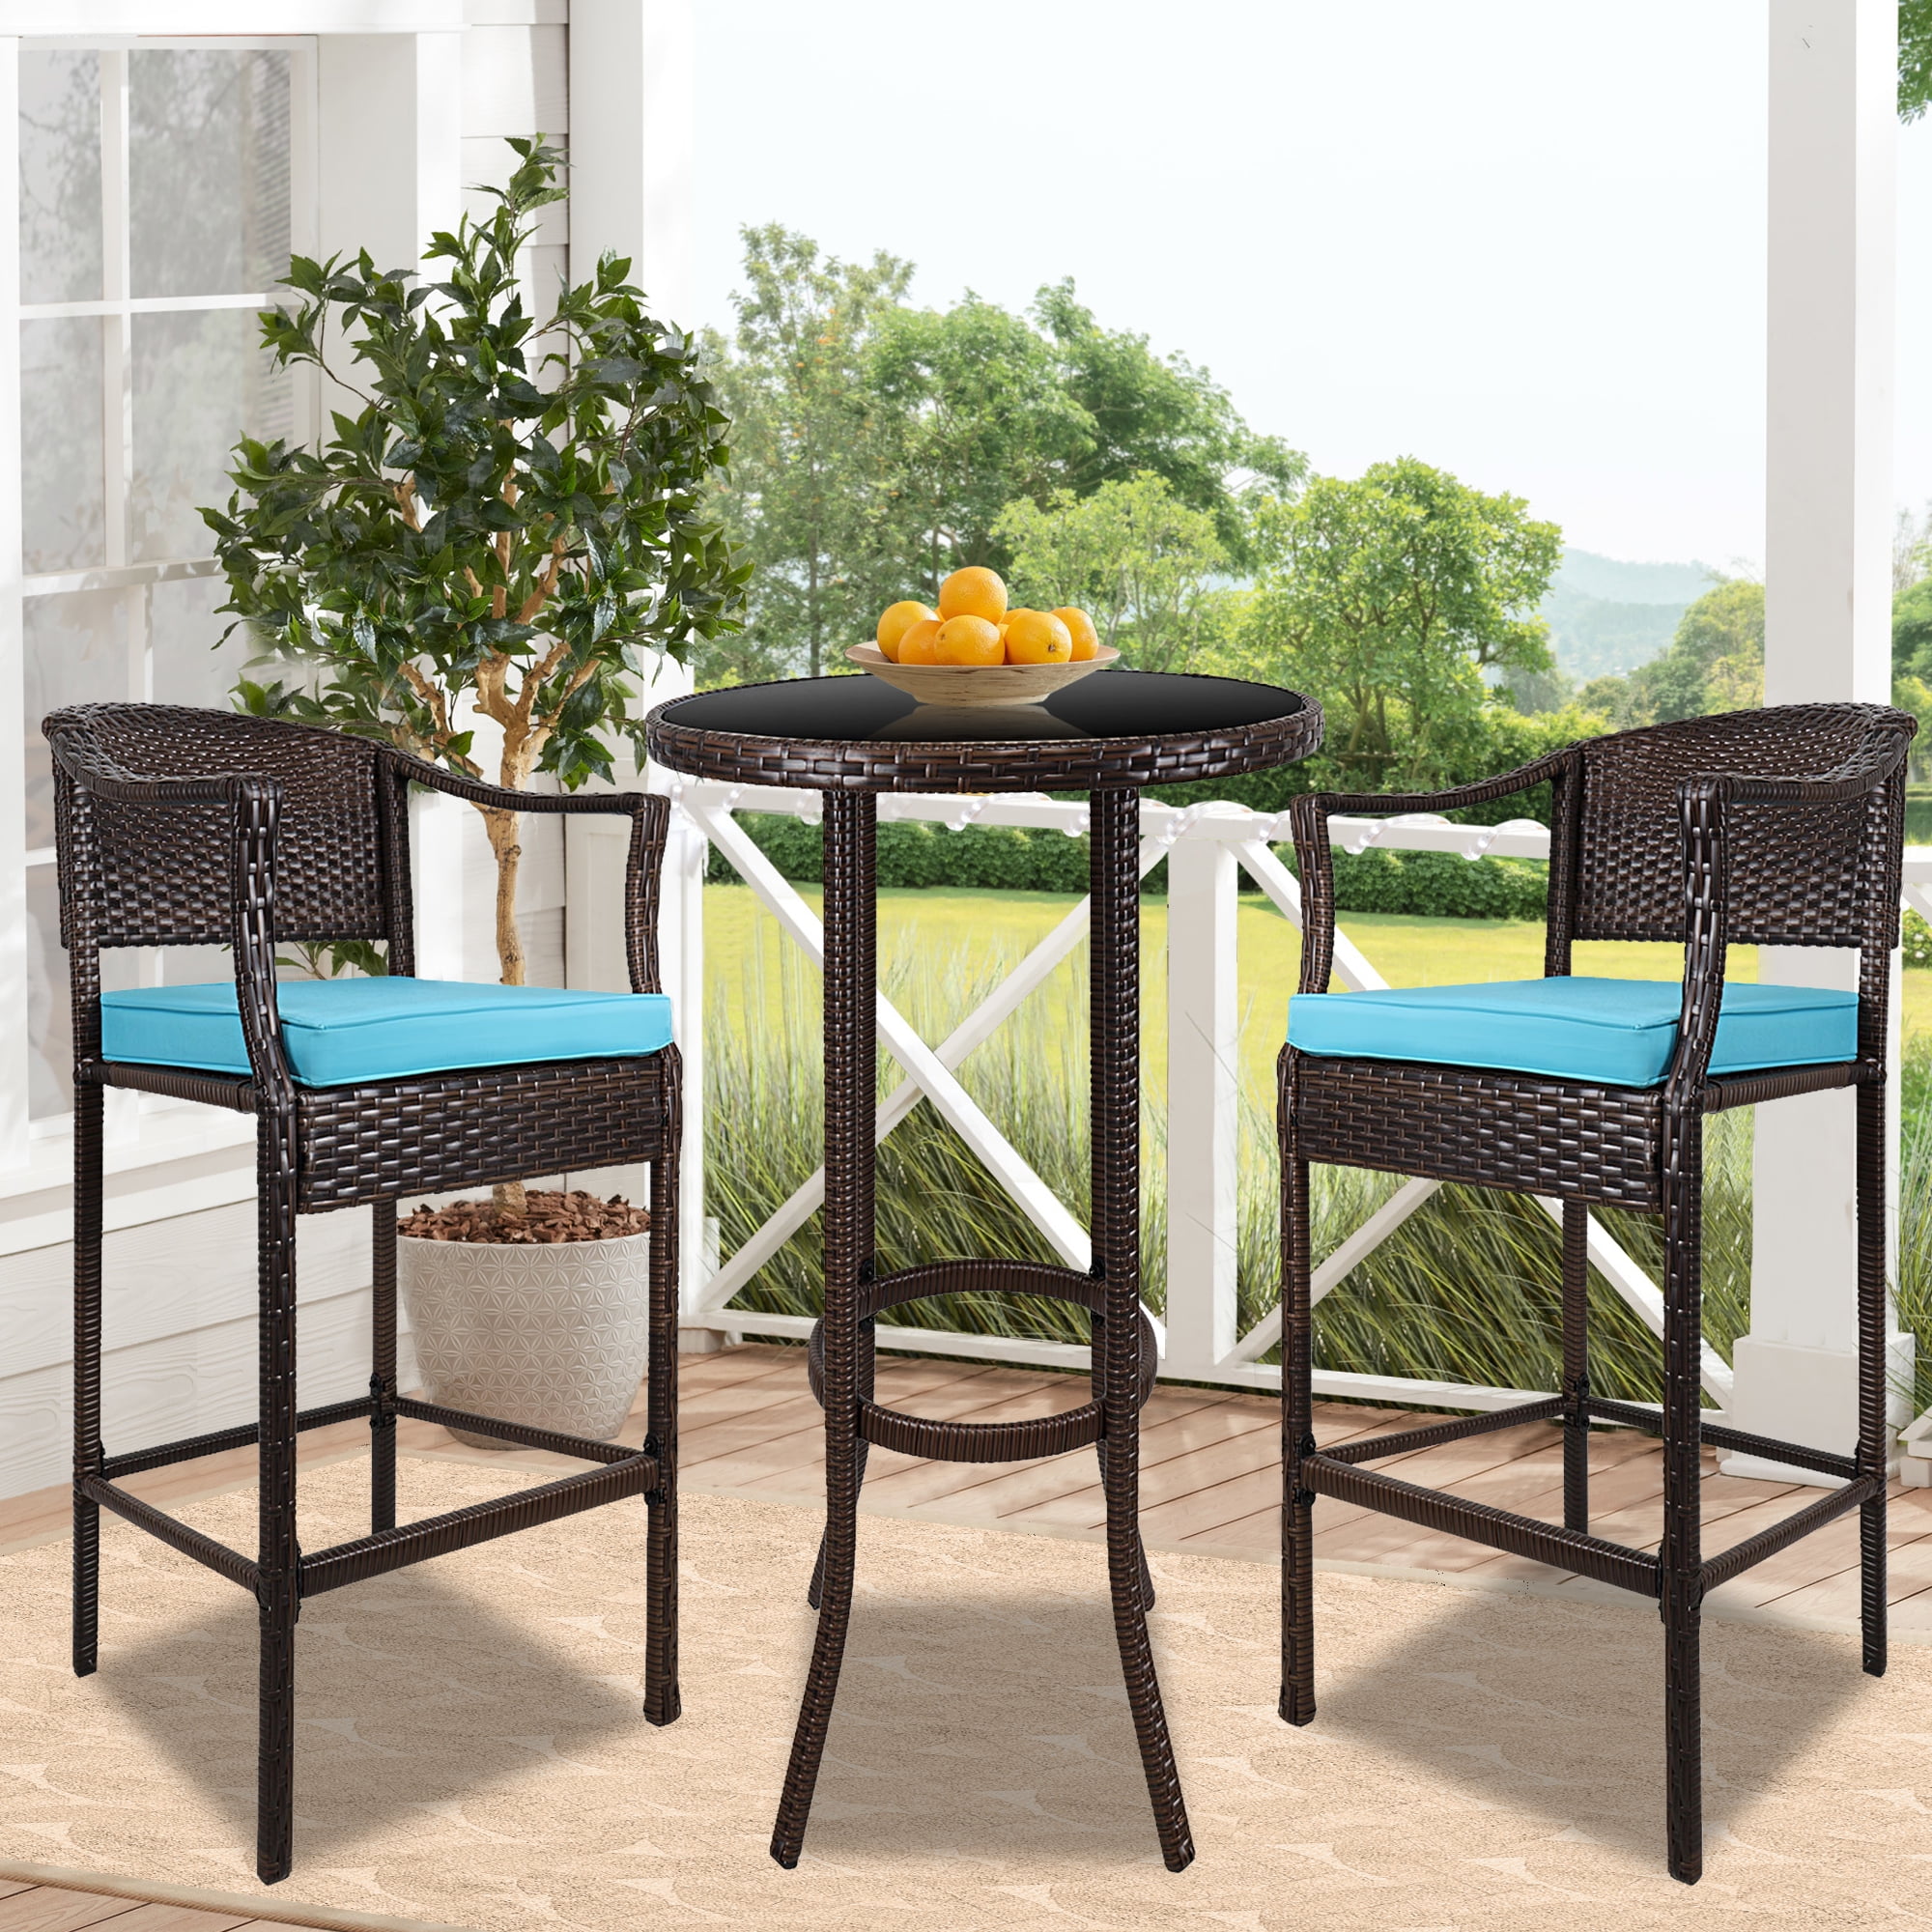 Chair Wicker Bar Height Bistro, Bar Height Outdoor Chairs And Table